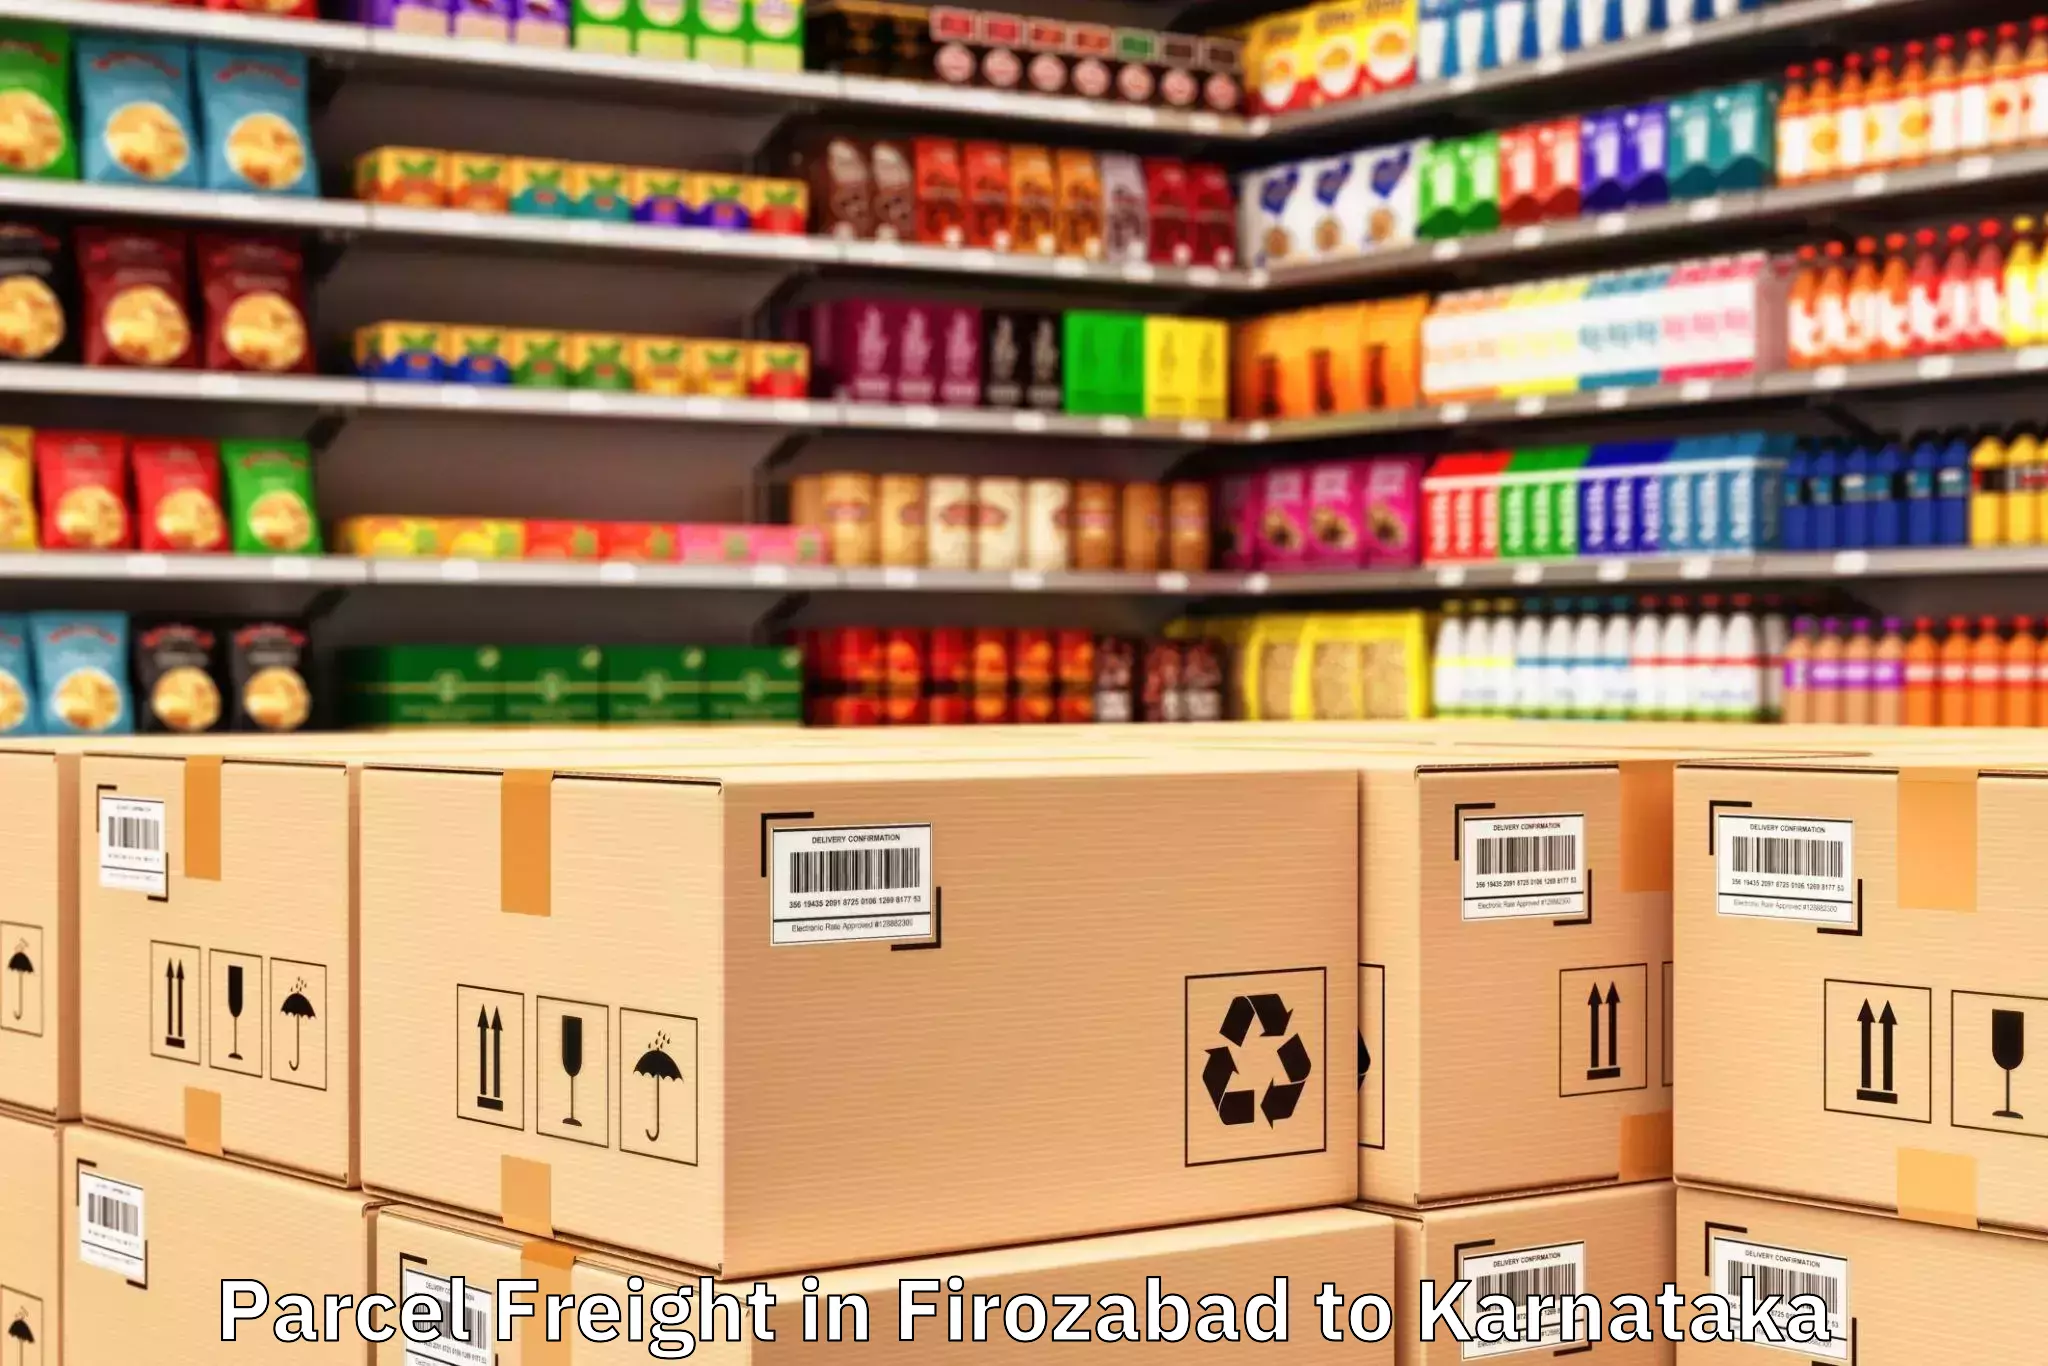 Hassle-Free Firozabad to Kerur Parcel Freight